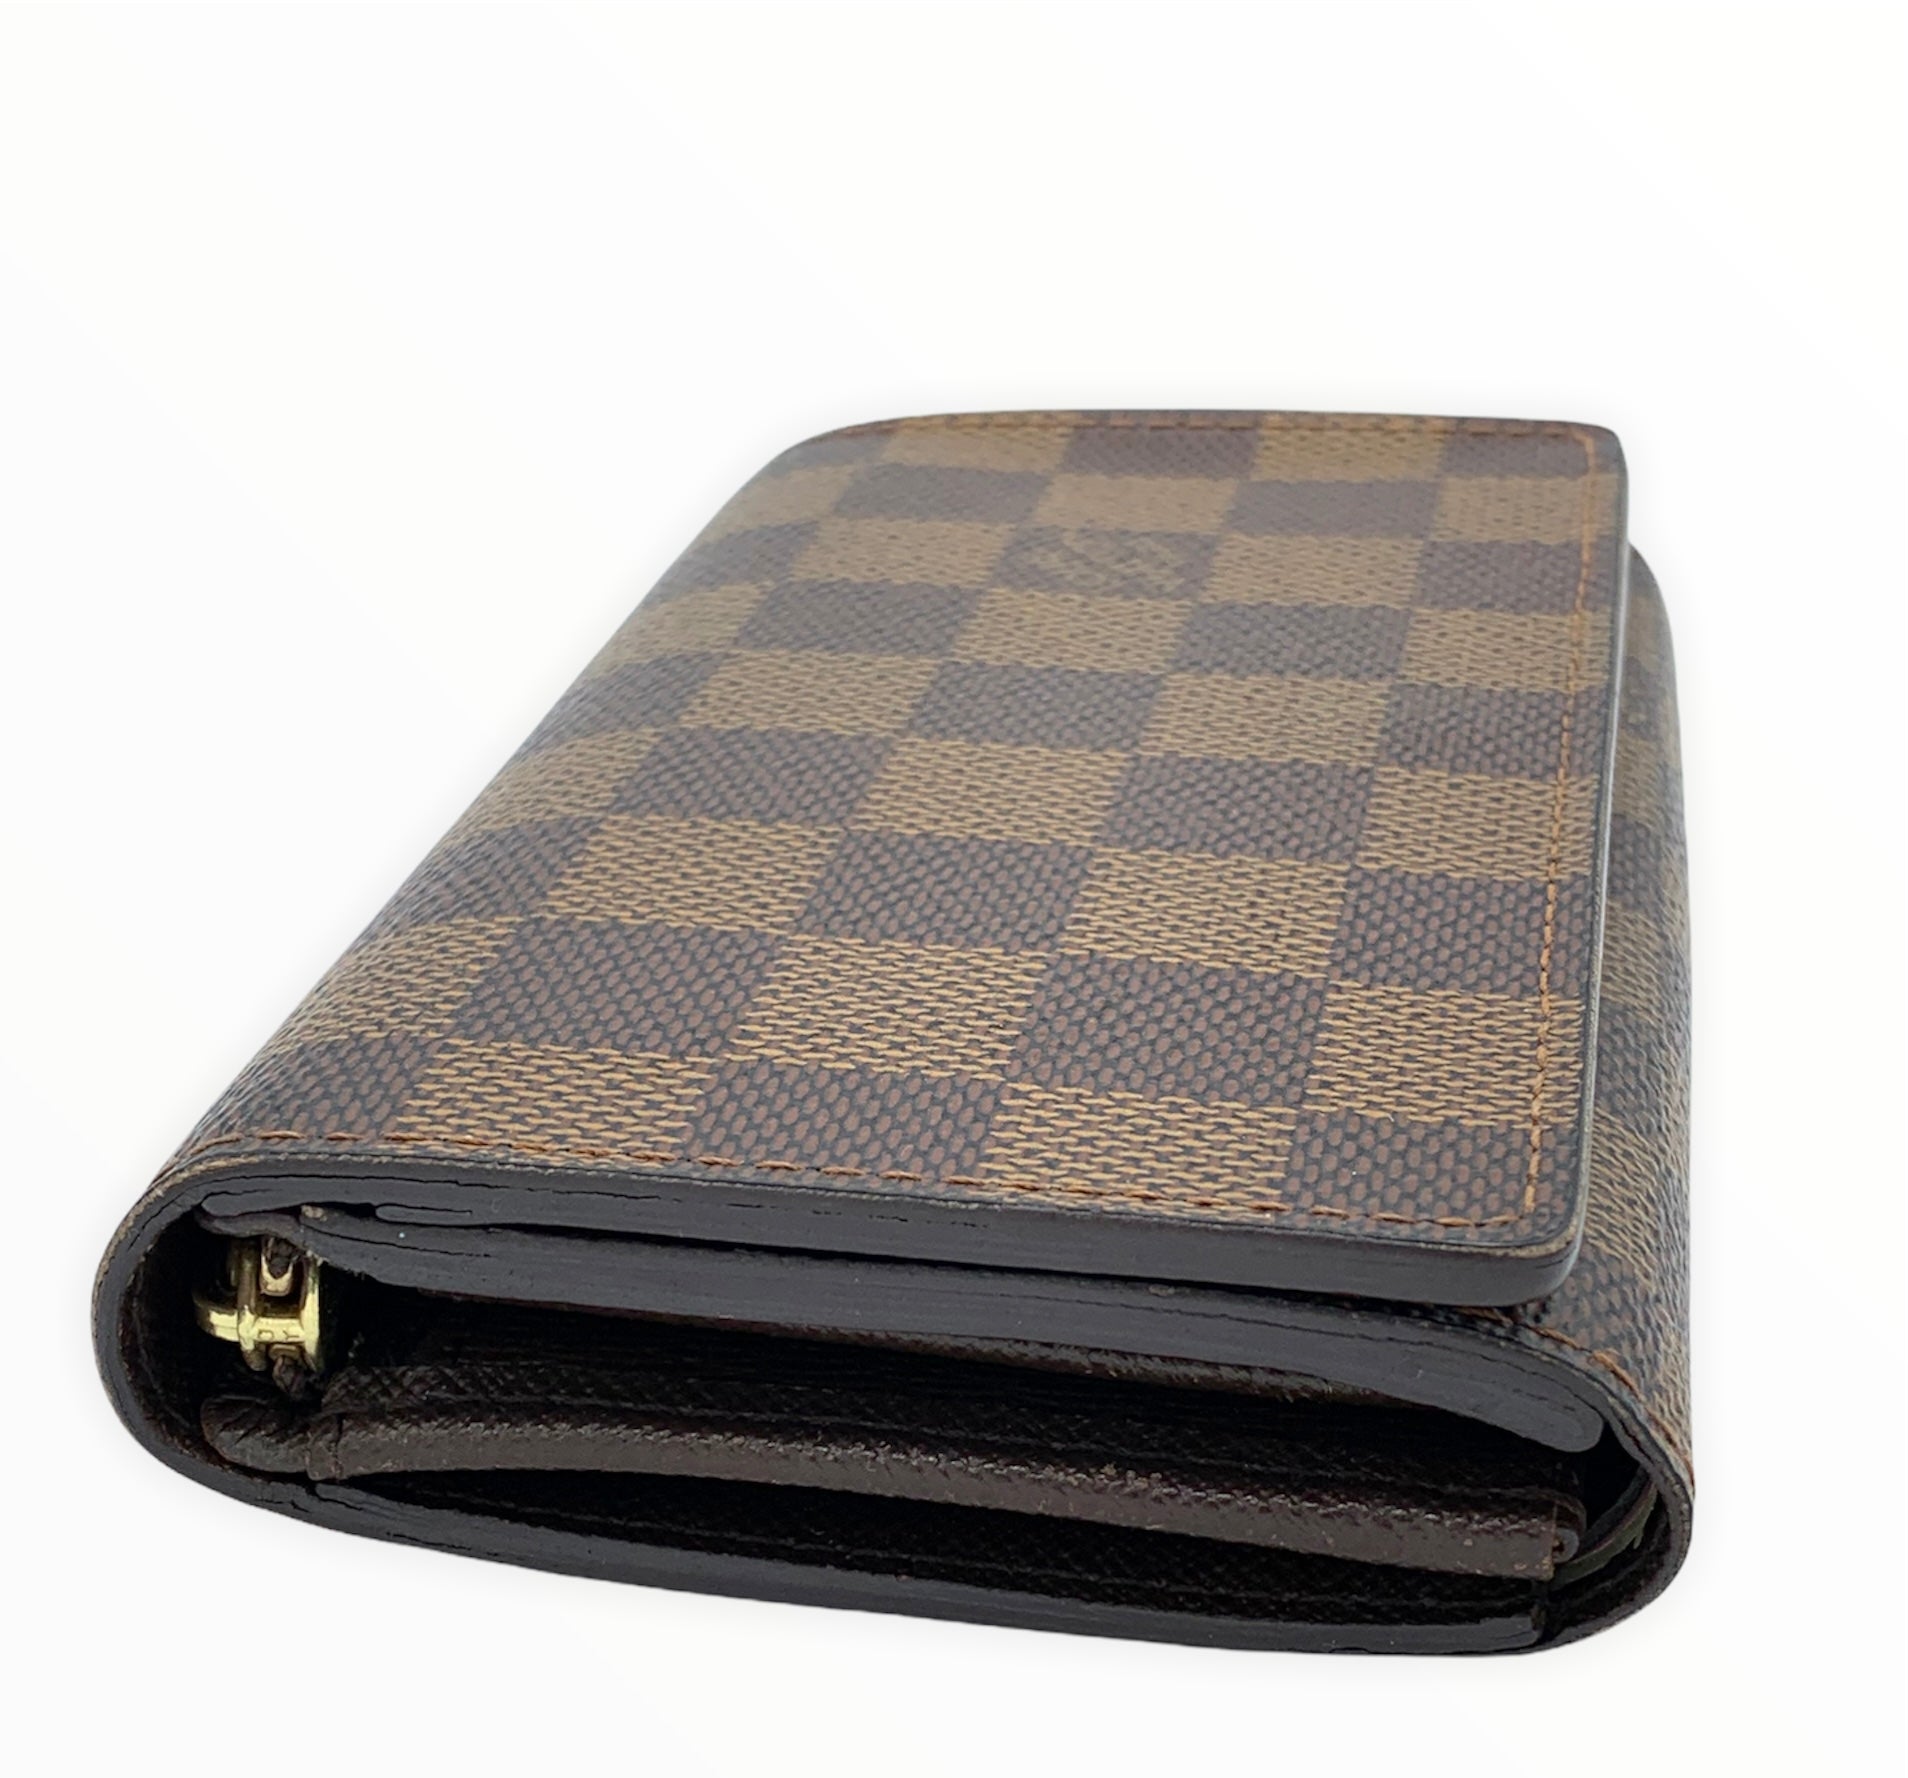 LOUIS VUITTON KEY POUCH IN DAMIER GRAPHITE - WHAT FITS INSIDE